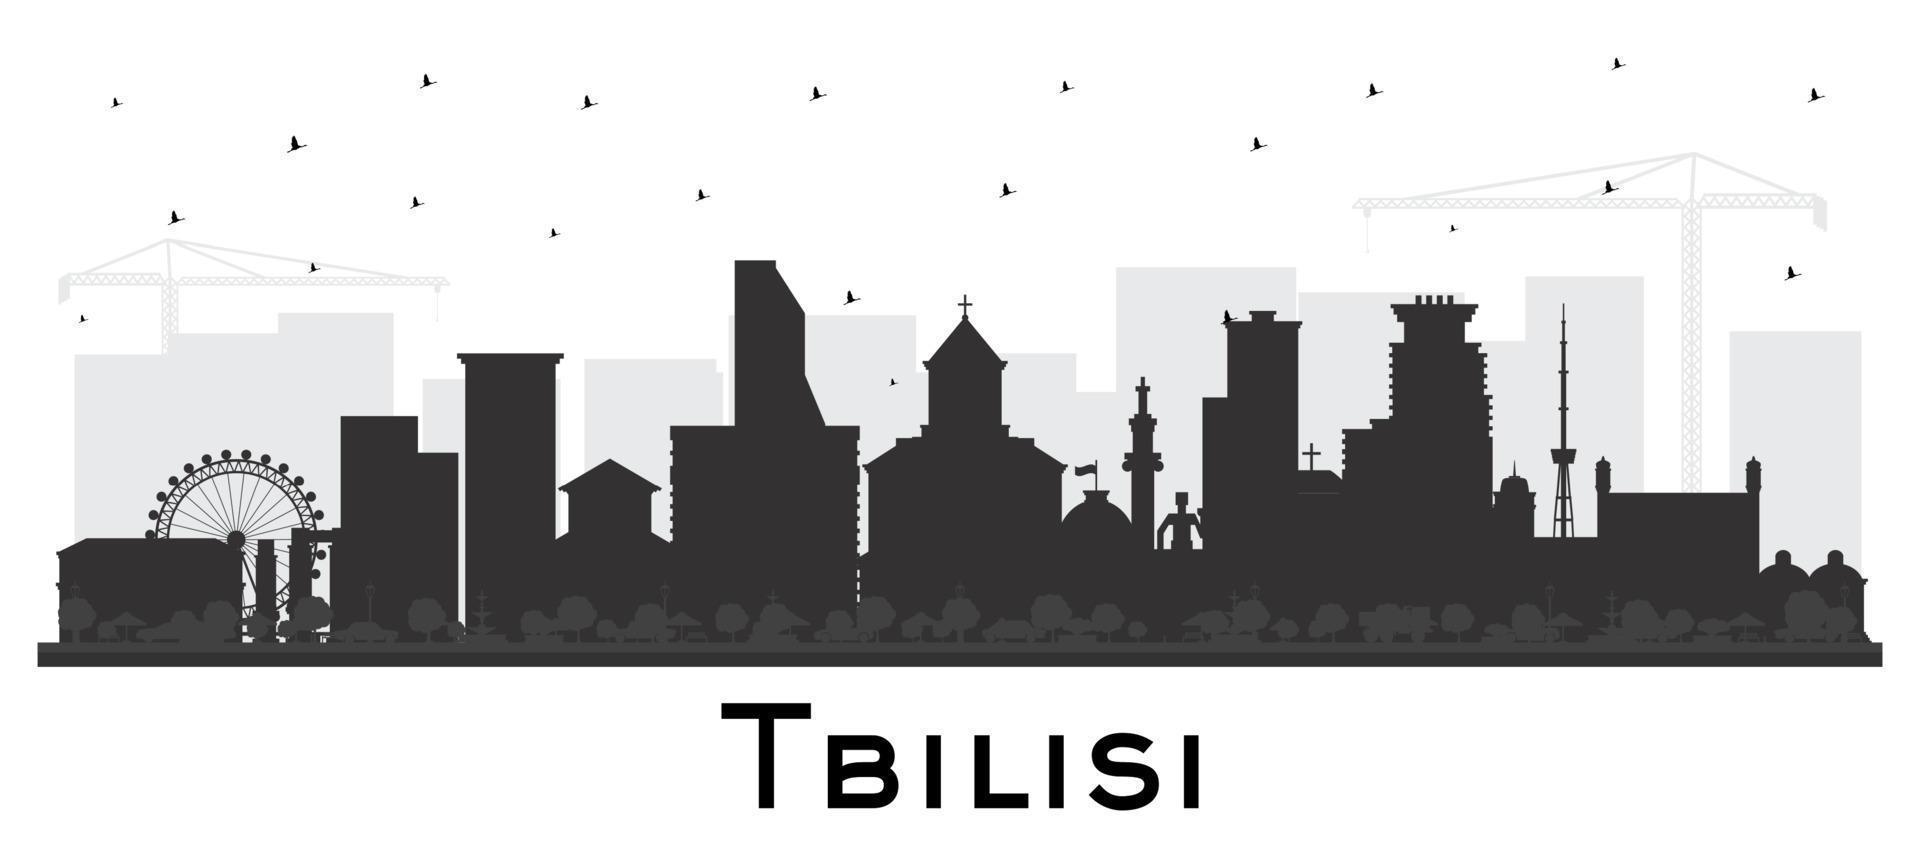 Tbilisi Georgia City Skyline Silhouette with Black Buildings Isolated on White. Vector Illustration. Tbilisi Cityscape with Landmarks.